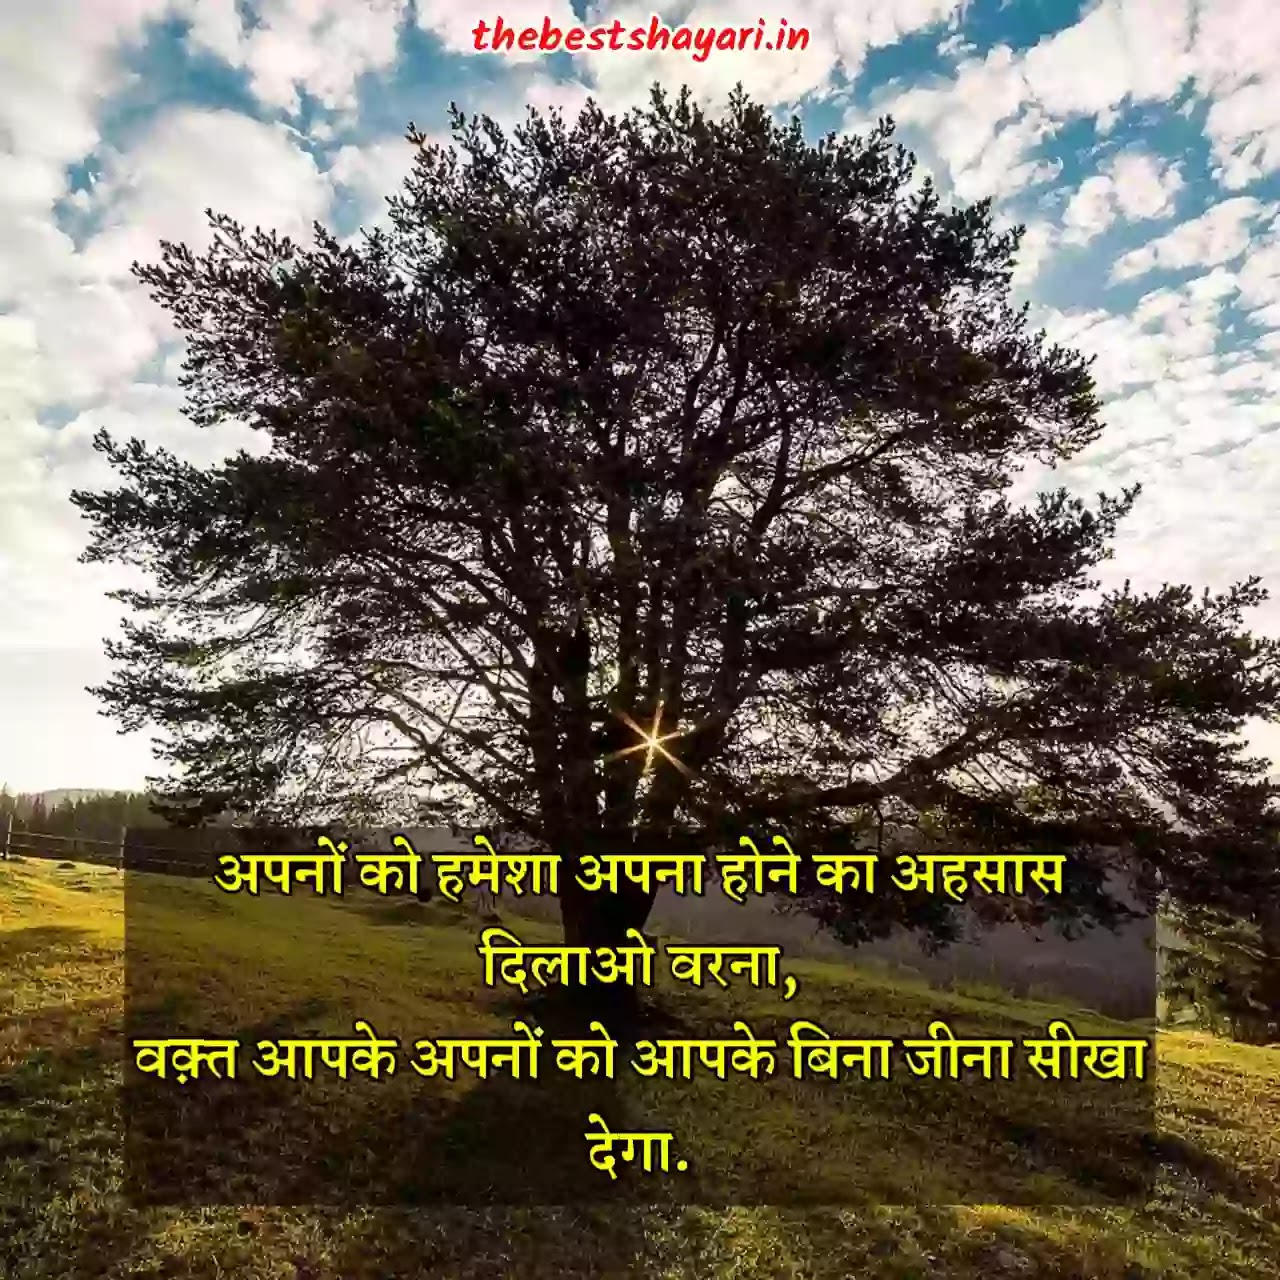 Hindi motivational quotes for students